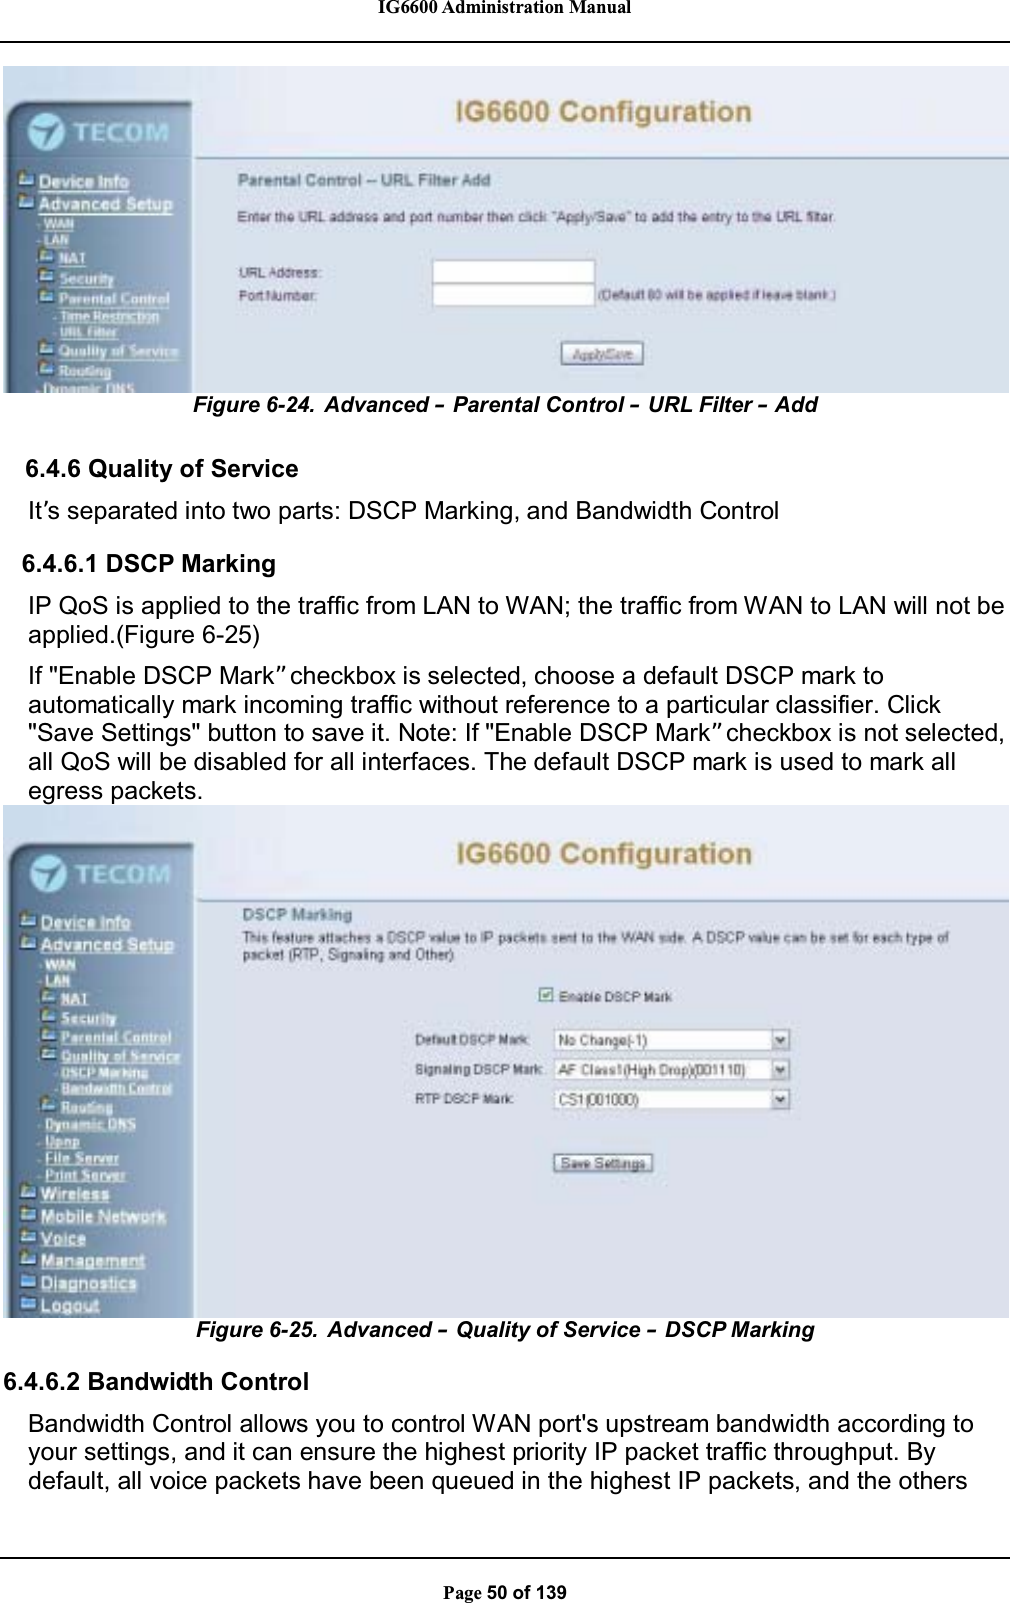 IG6600 Administration ManualPage 50 of 139Figure 6-24. Advanced –Parental Control –URL Filter –Add6.4.6 Quality of ServiceIt’s separated into two parts: DSCP Marking, and Bandwidth Control6.4.6.1 DSCP MarkingIP QoS is applied to the traffic from LAN to WAN; the traffic from WAN to LAN will not beapplied.(Figure 6-25)If &quot;Enable DSCP Mark”checkbox is selected, choose a default DSCP mark toautomatically mark incoming traffic without reference to a particular classifier. Click&quot;Save Settings&quot; button to save it. Note: If &quot;Enable DSCP Mark”checkbox is not selected,all QoS will be disabled for all interfaces. The default DSCP mark is used to mark allegress packets.Figure 6-25. Advanced – Quality of Service –DSCP Marking6.4.6.2 Bandwidth ControlBandwidth Control allows you to control WAN port&apos;s upstream bandwidth according toyour settings, and it can ensure the highest priority IP packet traffic throughput. Bydefault, all voice packets have been queued in the highest IP packets, and the others